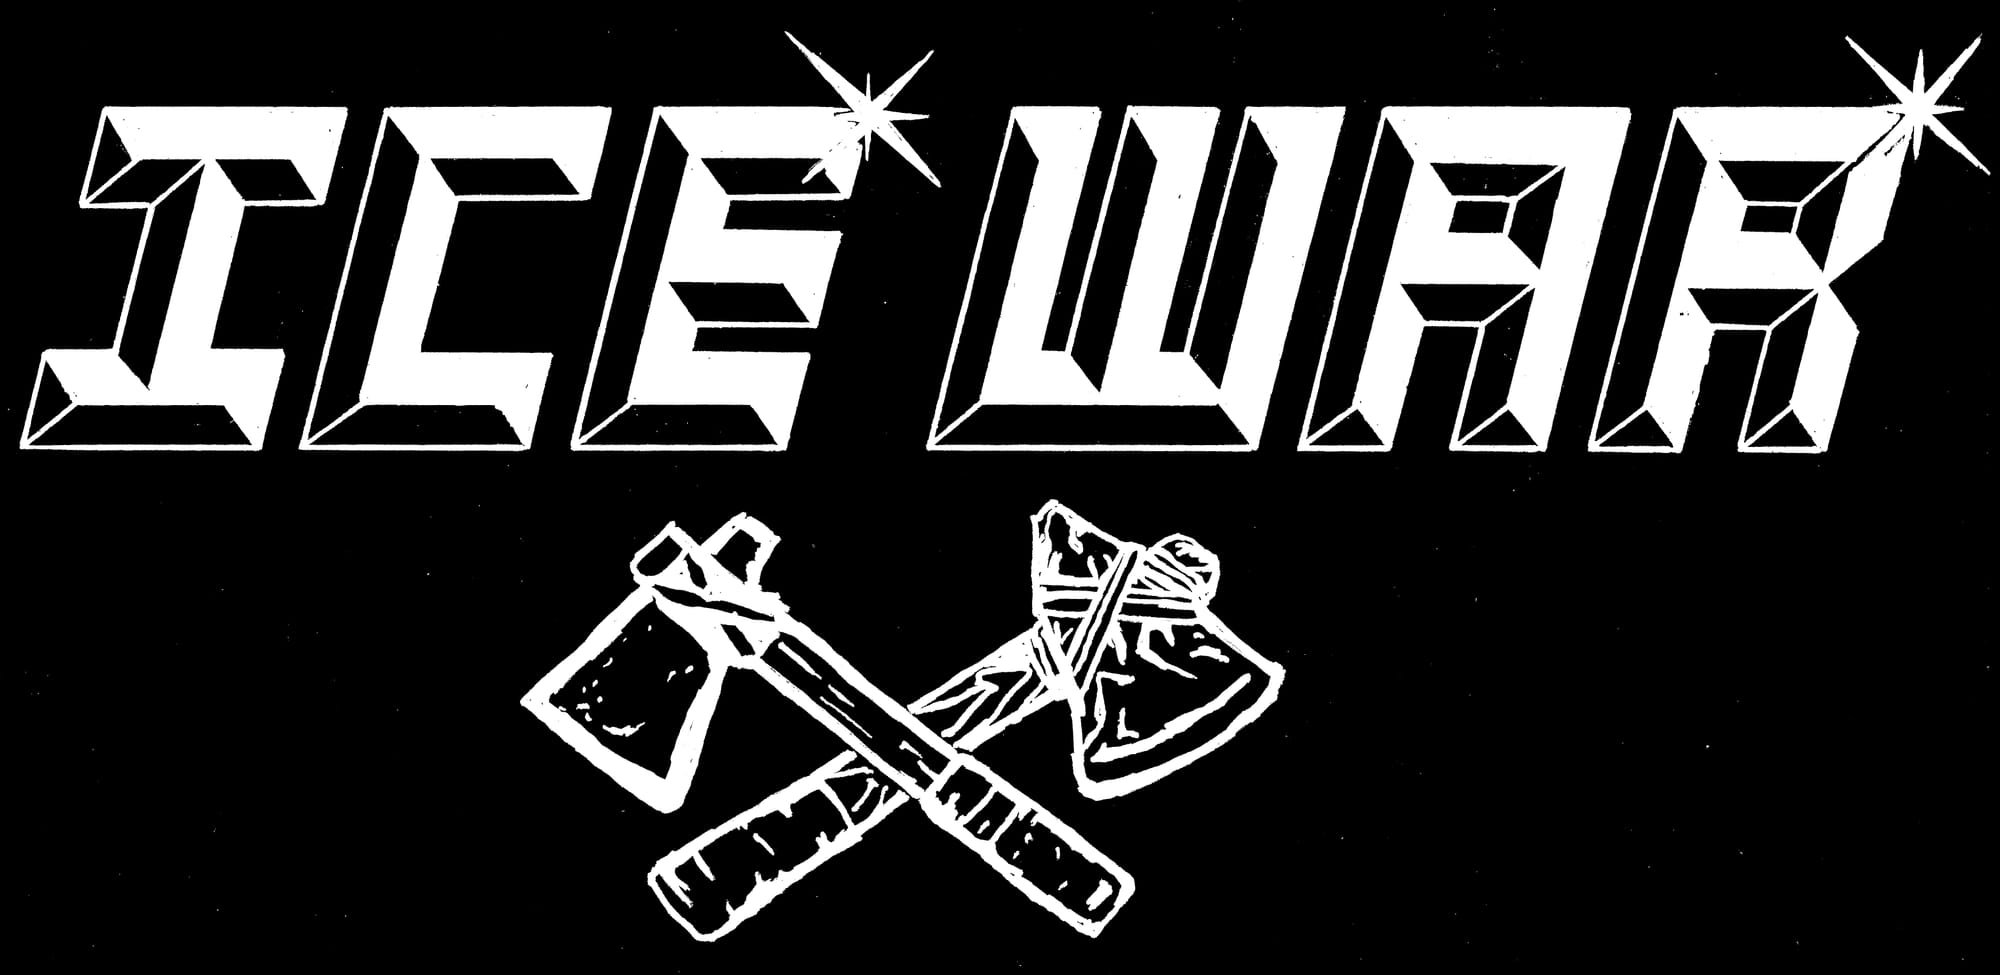 Interview with ICE WAR